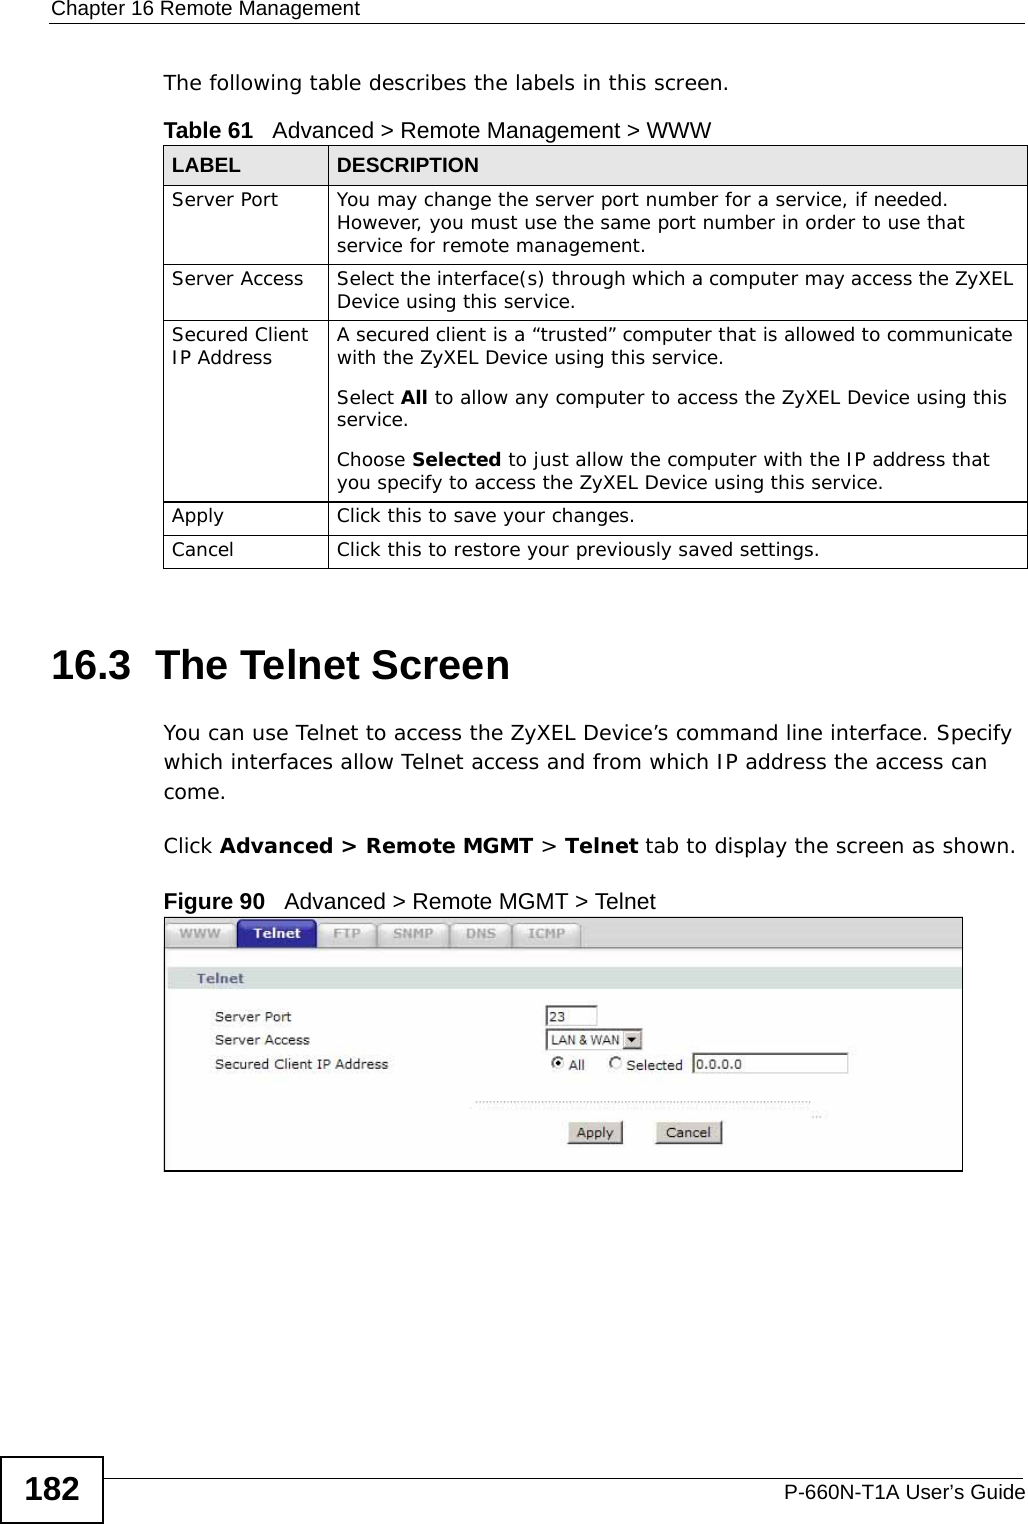 Chapter 16 Remote ManagementP-660N-T1A User’s Guide182The following table describes the labels in this screen.16.3  The Telnet ScreenYou can use Telnet to access the ZyXEL Device’s command line interface. Specify which interfaces allow Telnet access and from which IP address the access can come.Click Advanced &gt; Remote MGMT &gt; Telnet tab to display the screen as shown. Figure 90   Advanced &gt; Remote MGMT &gt; TelnetTable 61   Advanced &gt; Remote Management &gt; WWWLABEL DESCRIPTIONServer Port You may change the server port number for a service, if needed. However, you must use the same port number in order to use that service for remote management.Server Access Select the interface(s) through which a computer may access the ZyXEL Device using this service.Secured Client IP Address A secured client is a “trusted” computer that is allowed to communicate with the ZyXEL Device using this service. Select All to allow any computer to access the ZyXEL Device using this service.Choose Selected to just allow the computer with the IP address that you specify to access the ZyXEL Device using this service.Apply Click this to save your changes.Cancel Click this to restore your previously saved settings.